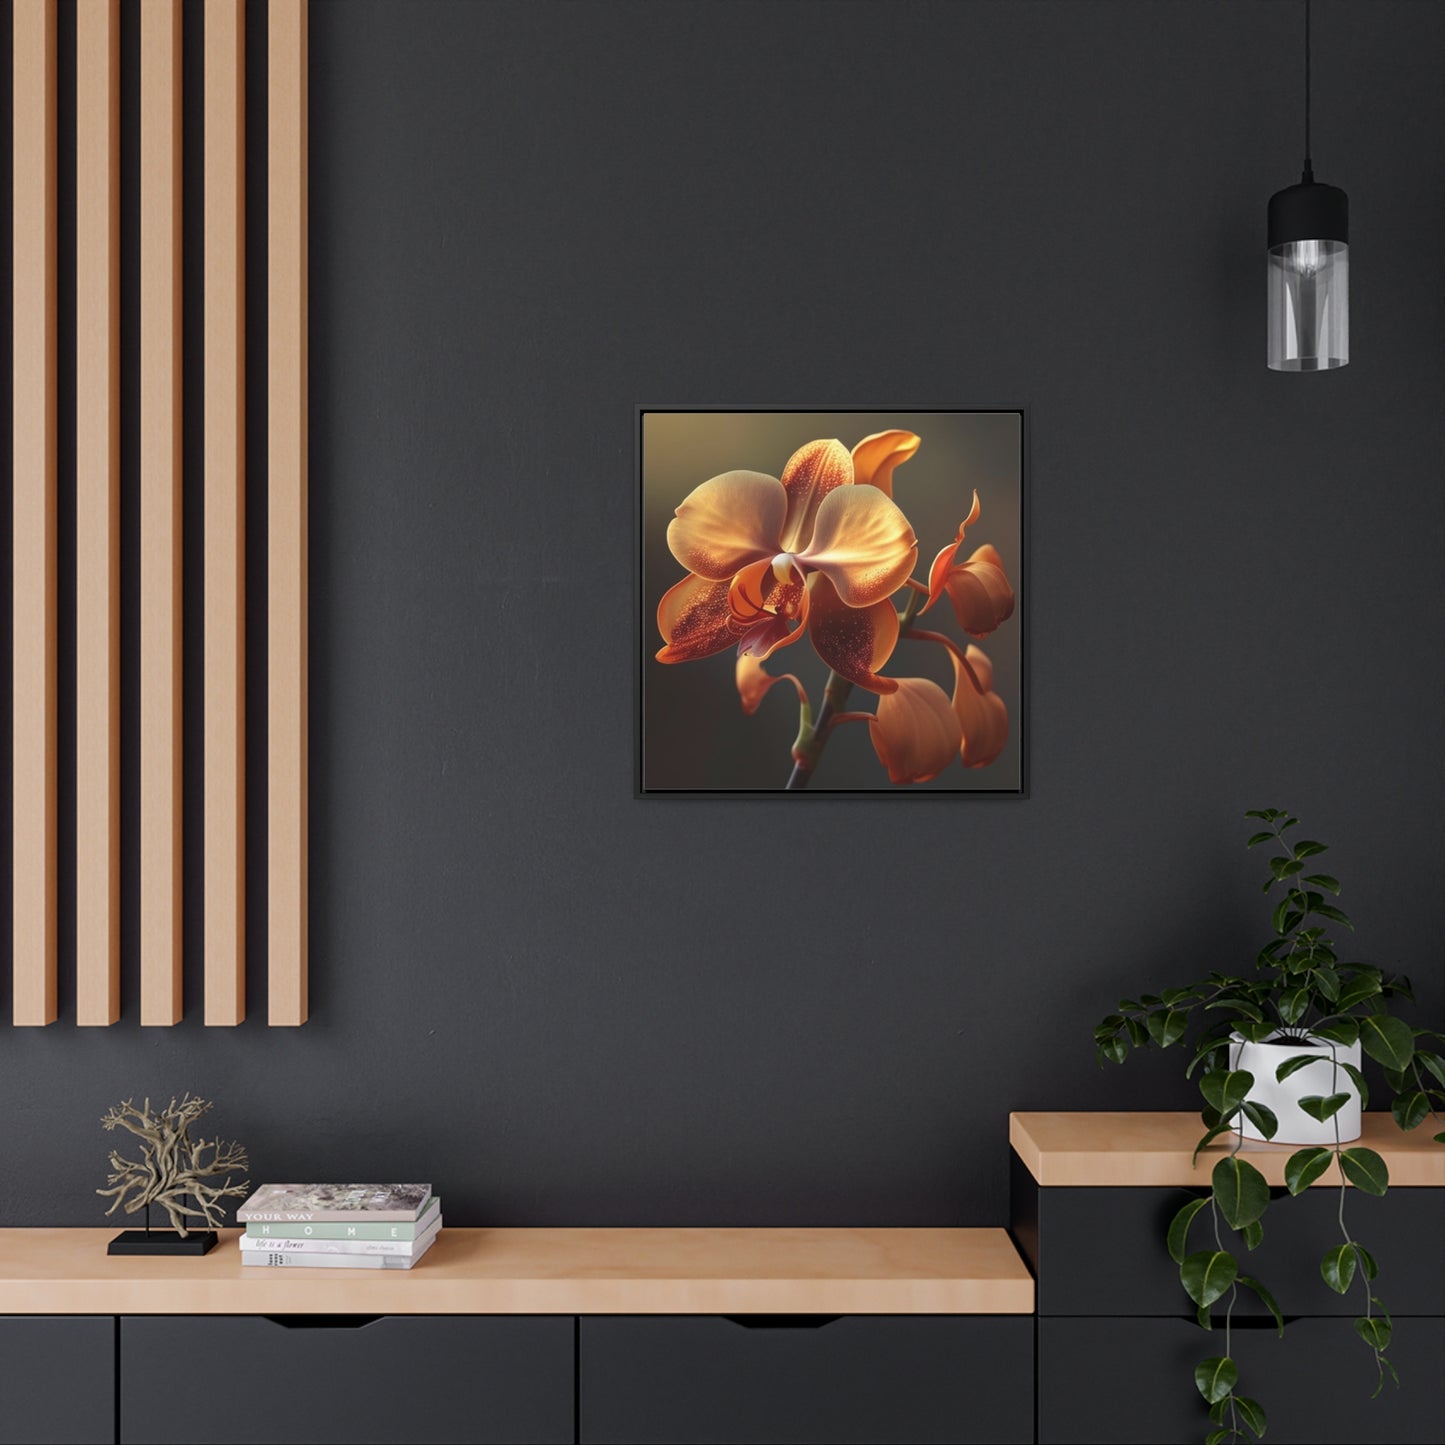 Gallery Canvas Wraps, Square Frame Orange Orchid 1